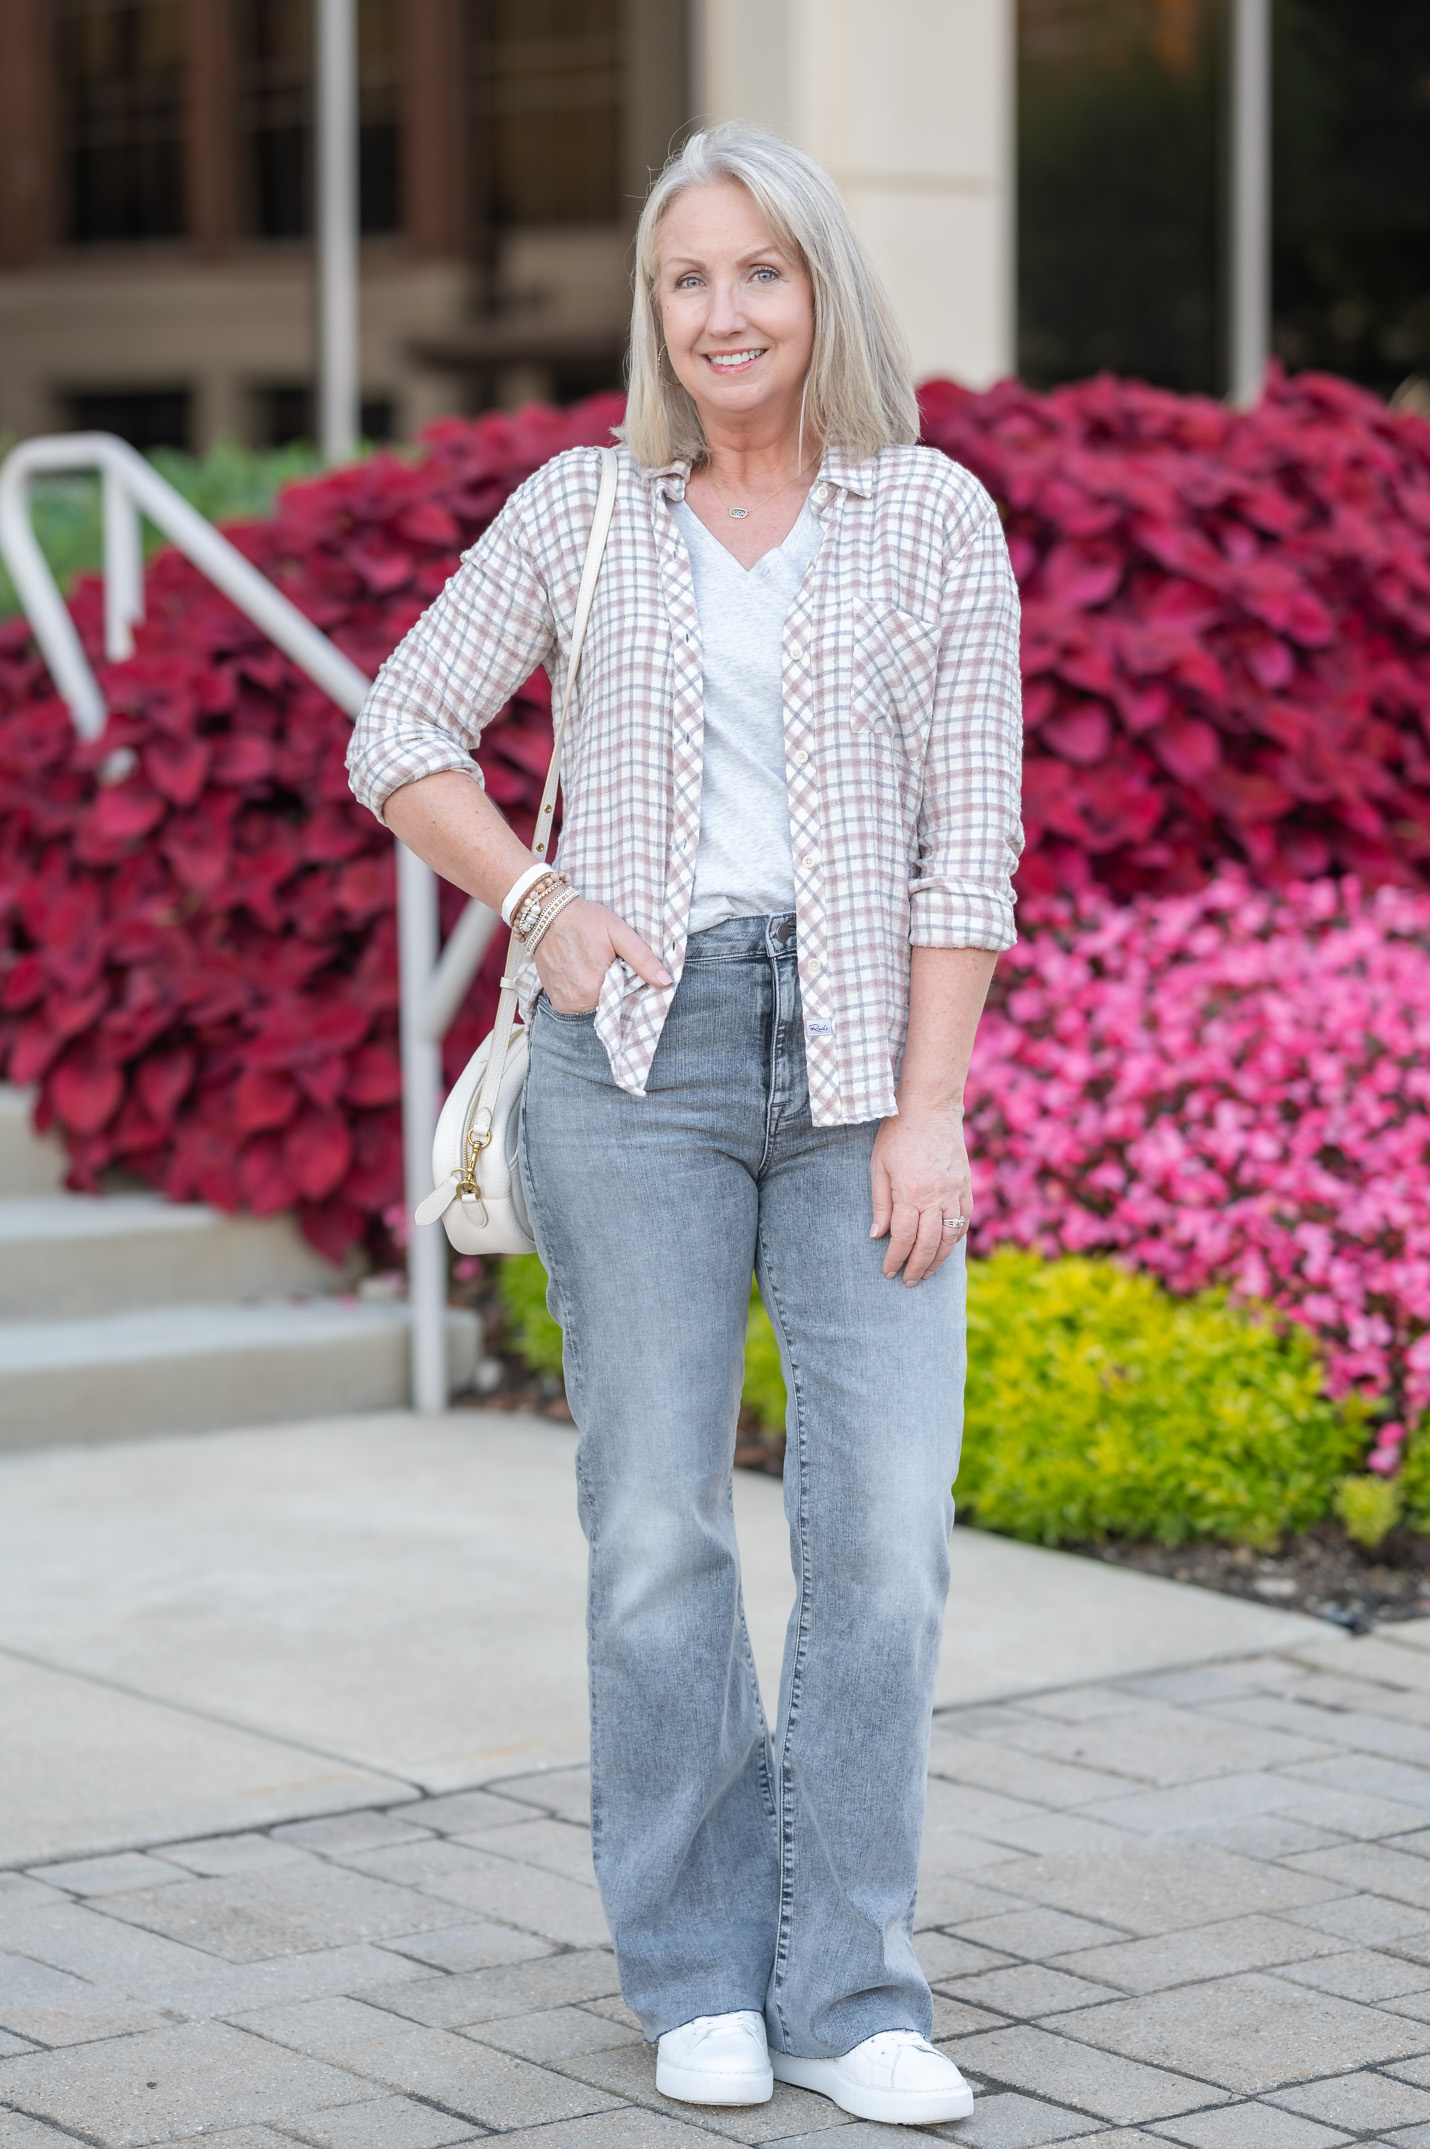 Styling Grey Jeans and a Rails Plaid Shirt